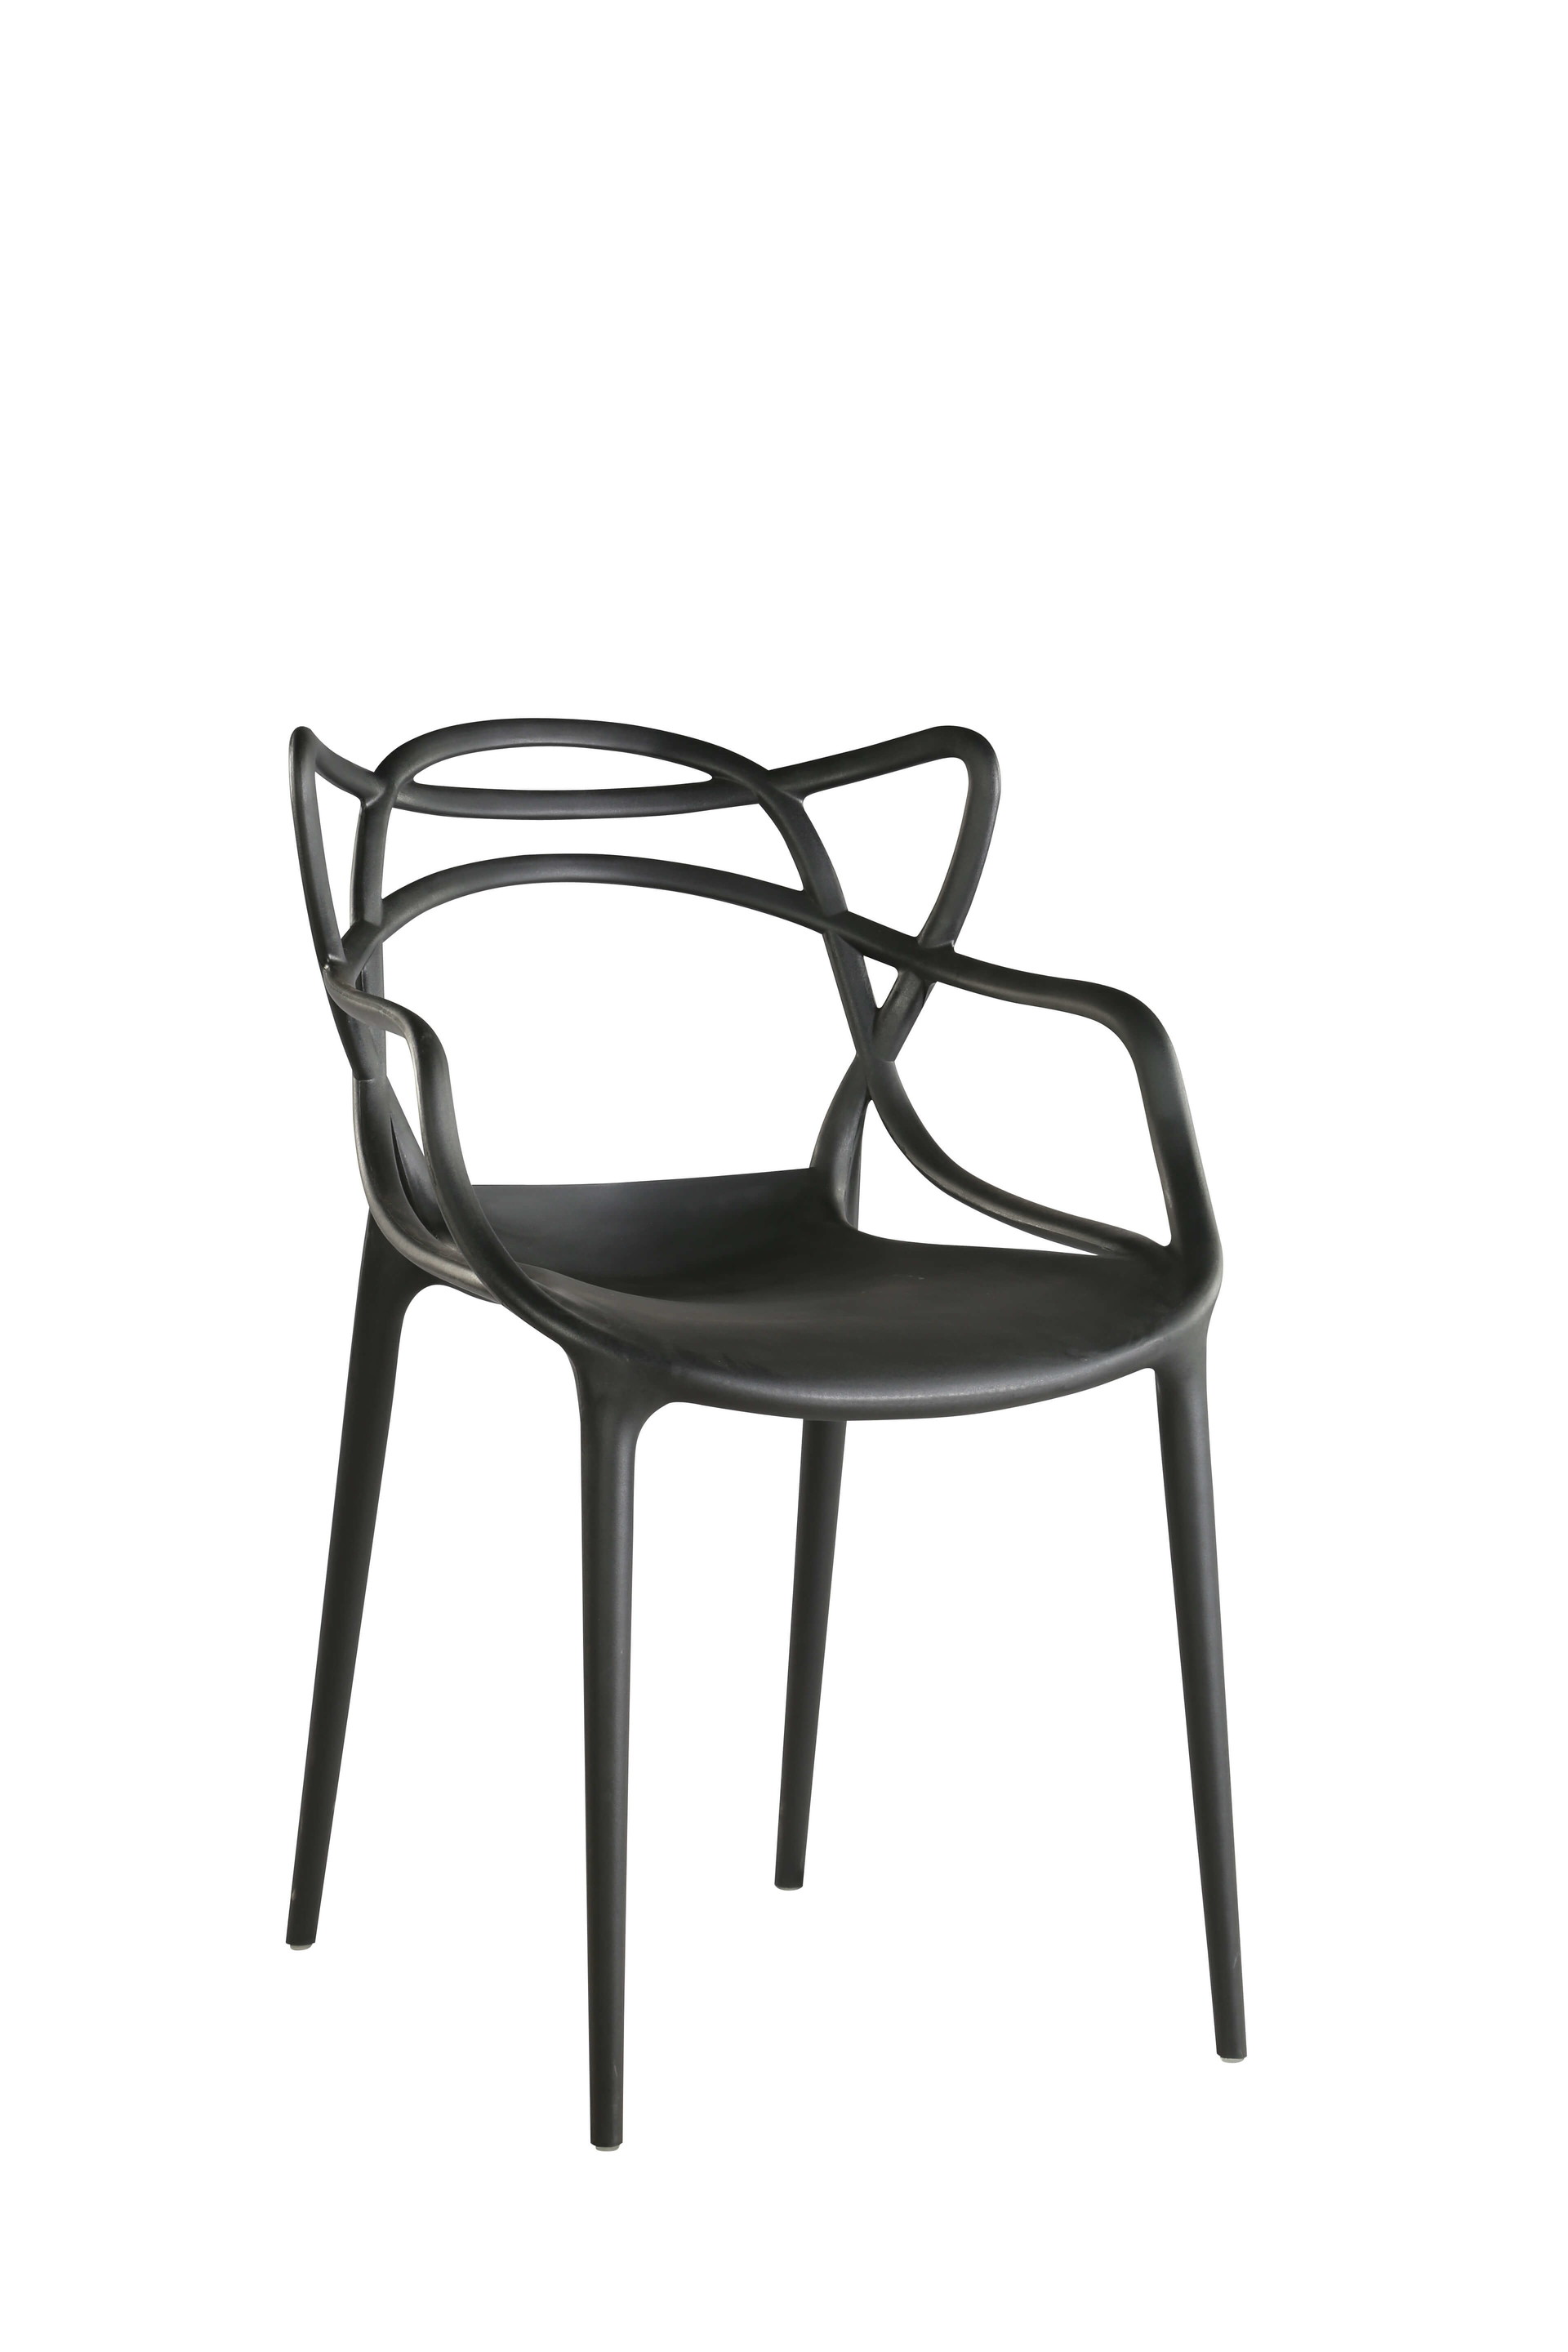 D&N Furniture Top dining chair furniture supply for restaurant